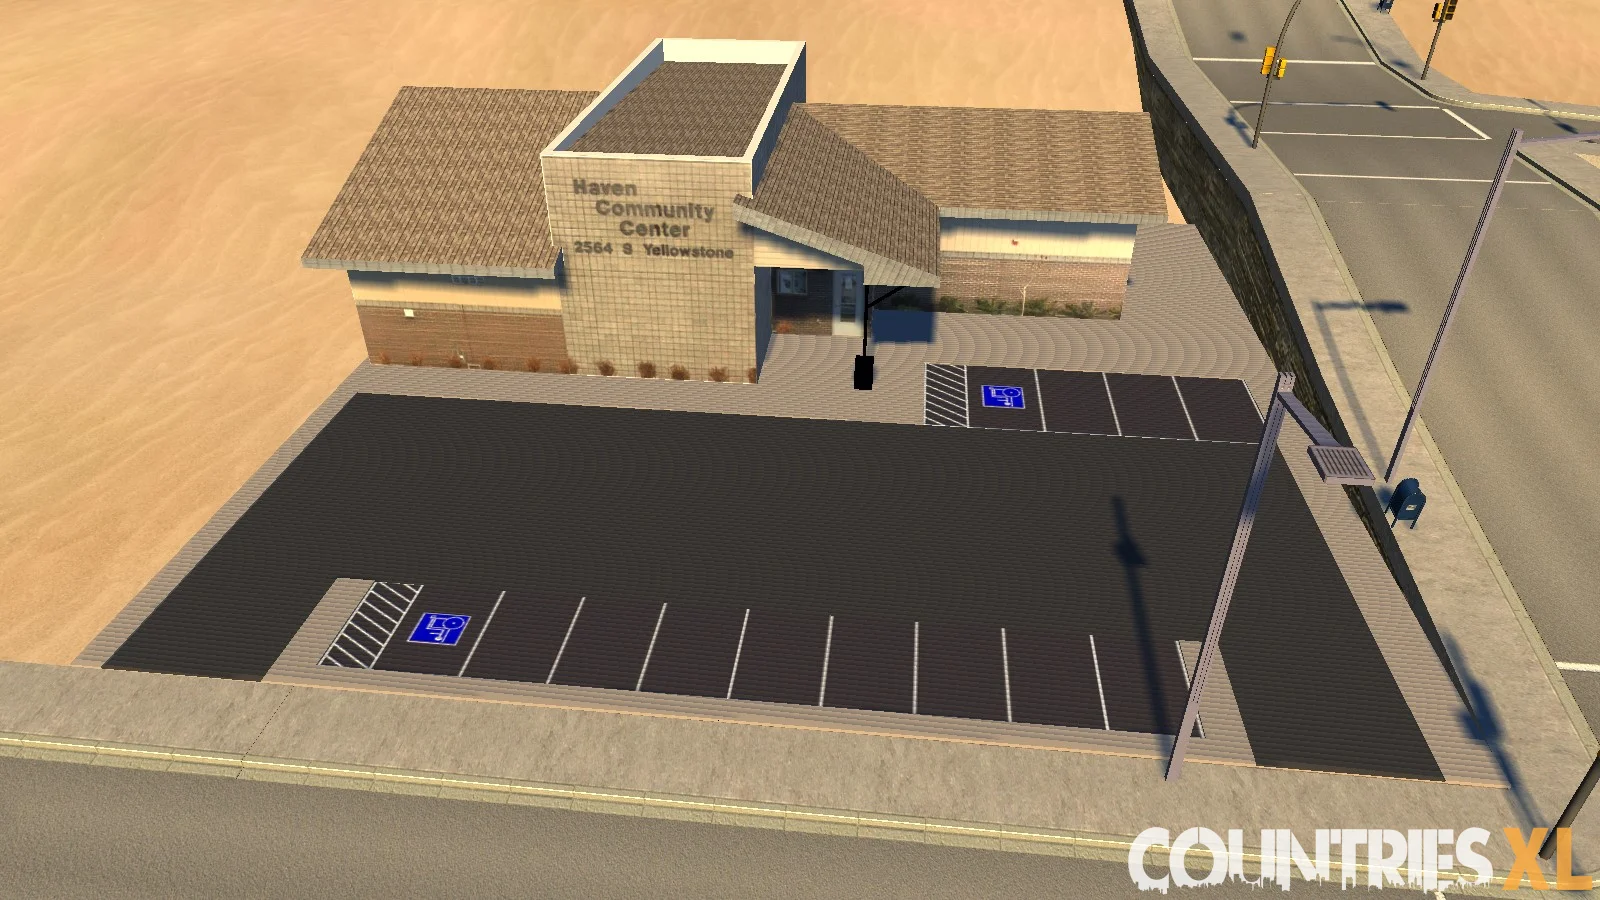 [CountriesXL] Haven Community Center For XXL By 1